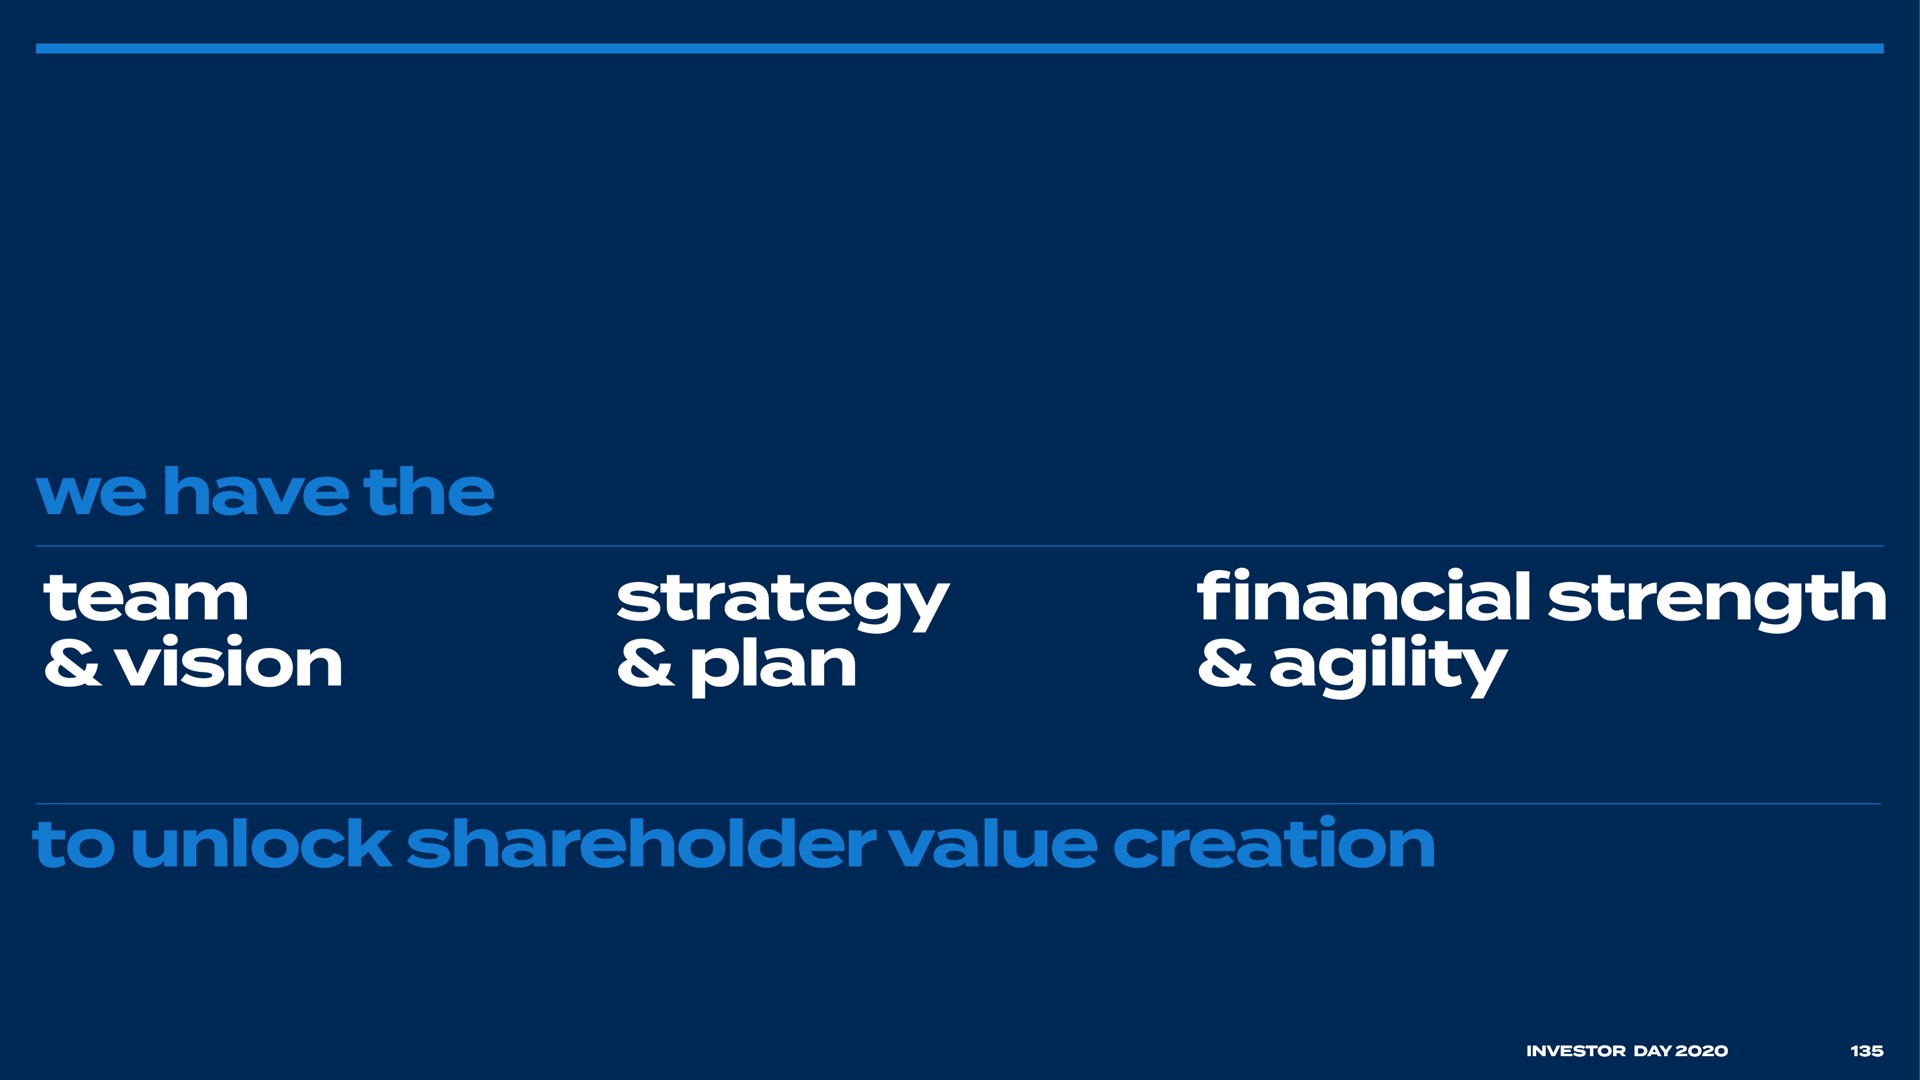 we have the team vision strategy plan strength agility to unlock shareholder value creation a financial | Bed Bath & Beyond